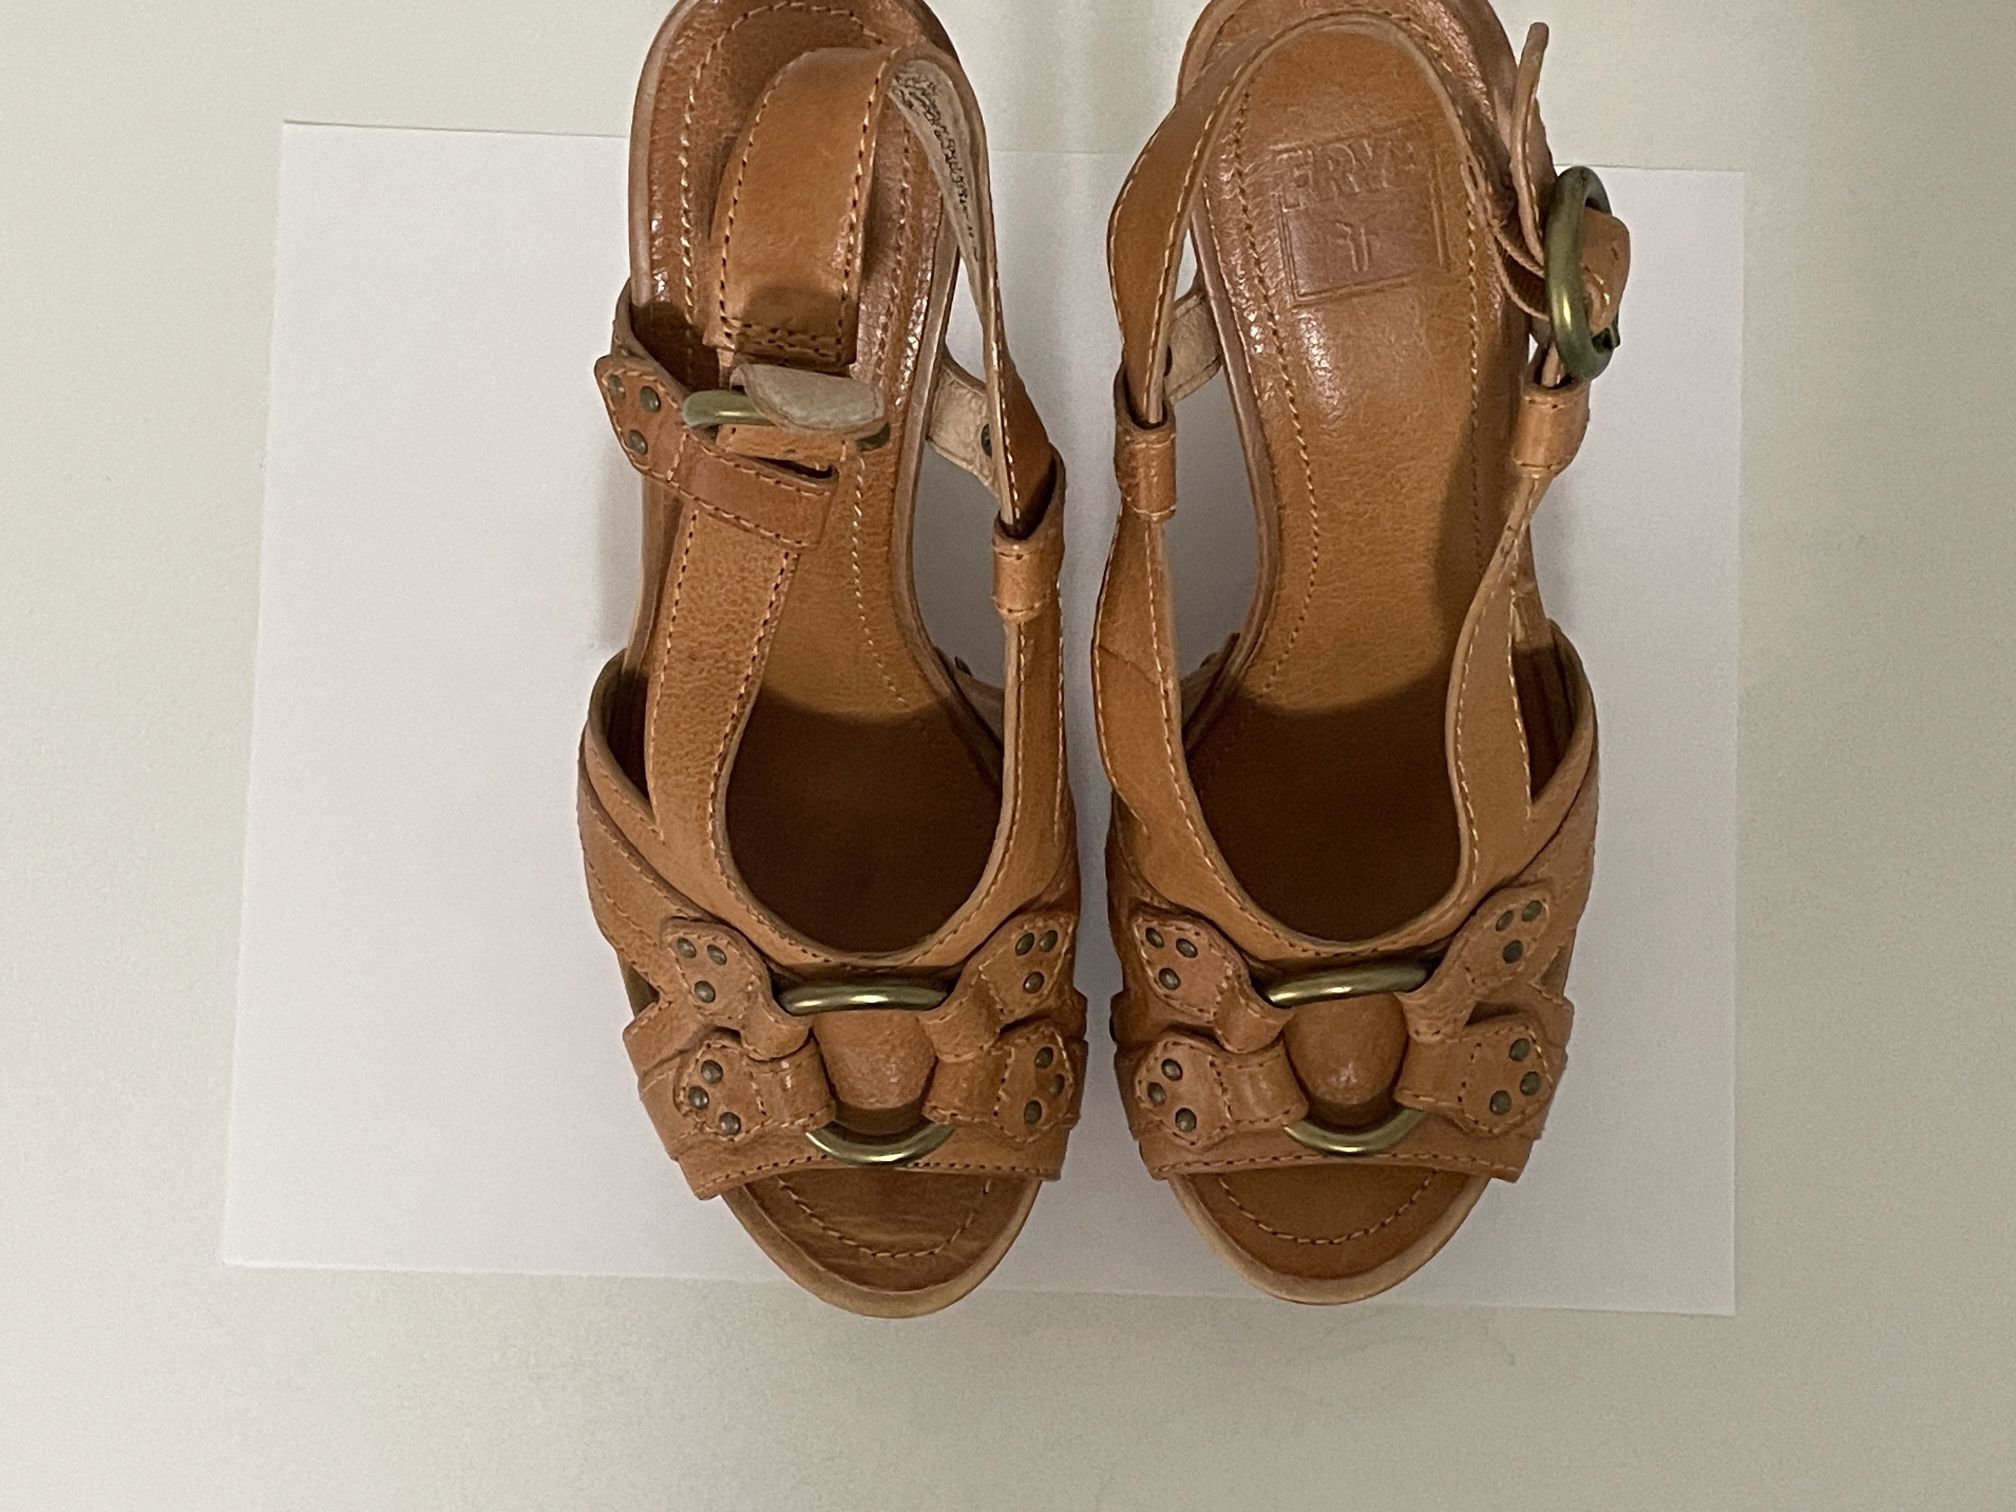 Frye Women’s June Slingback Brown Leather Wooden Wedge Sandals Size 8